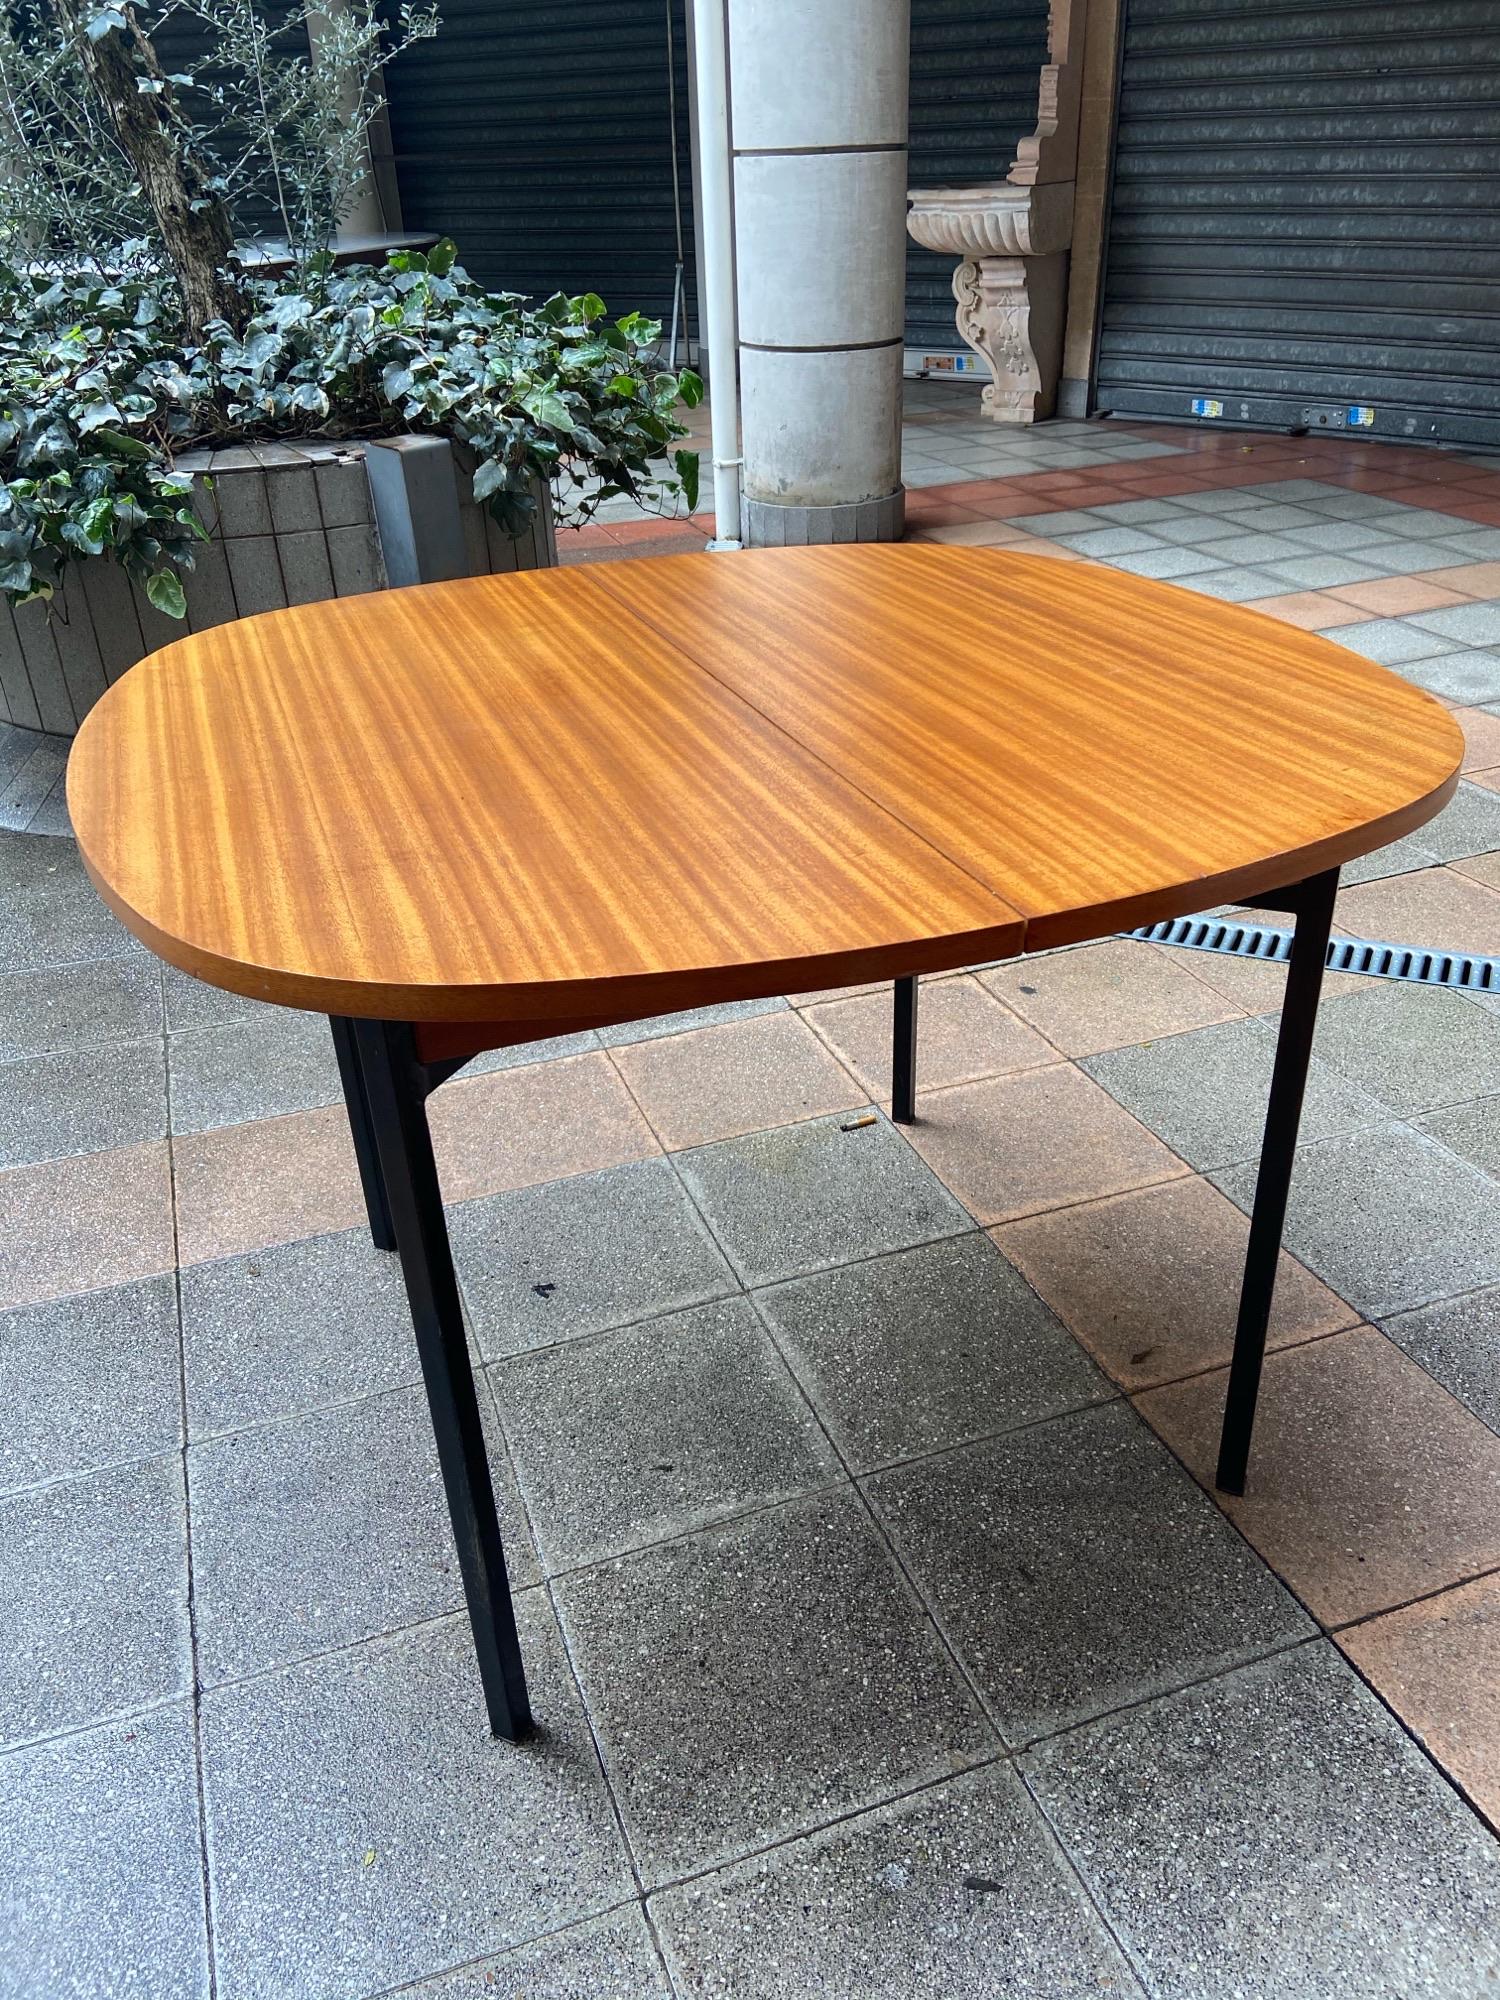 TRC20 system dining table- Pierre Guariche

Huchers Minvielle edition,
Circa 1960
Perfect condition 

Mahogany and black metal 
Integrated extension leaf 

Closed 
Dimensions W 105 x D 105 x H 74

Open 
W 155 x D 105 x H 74

1490€.